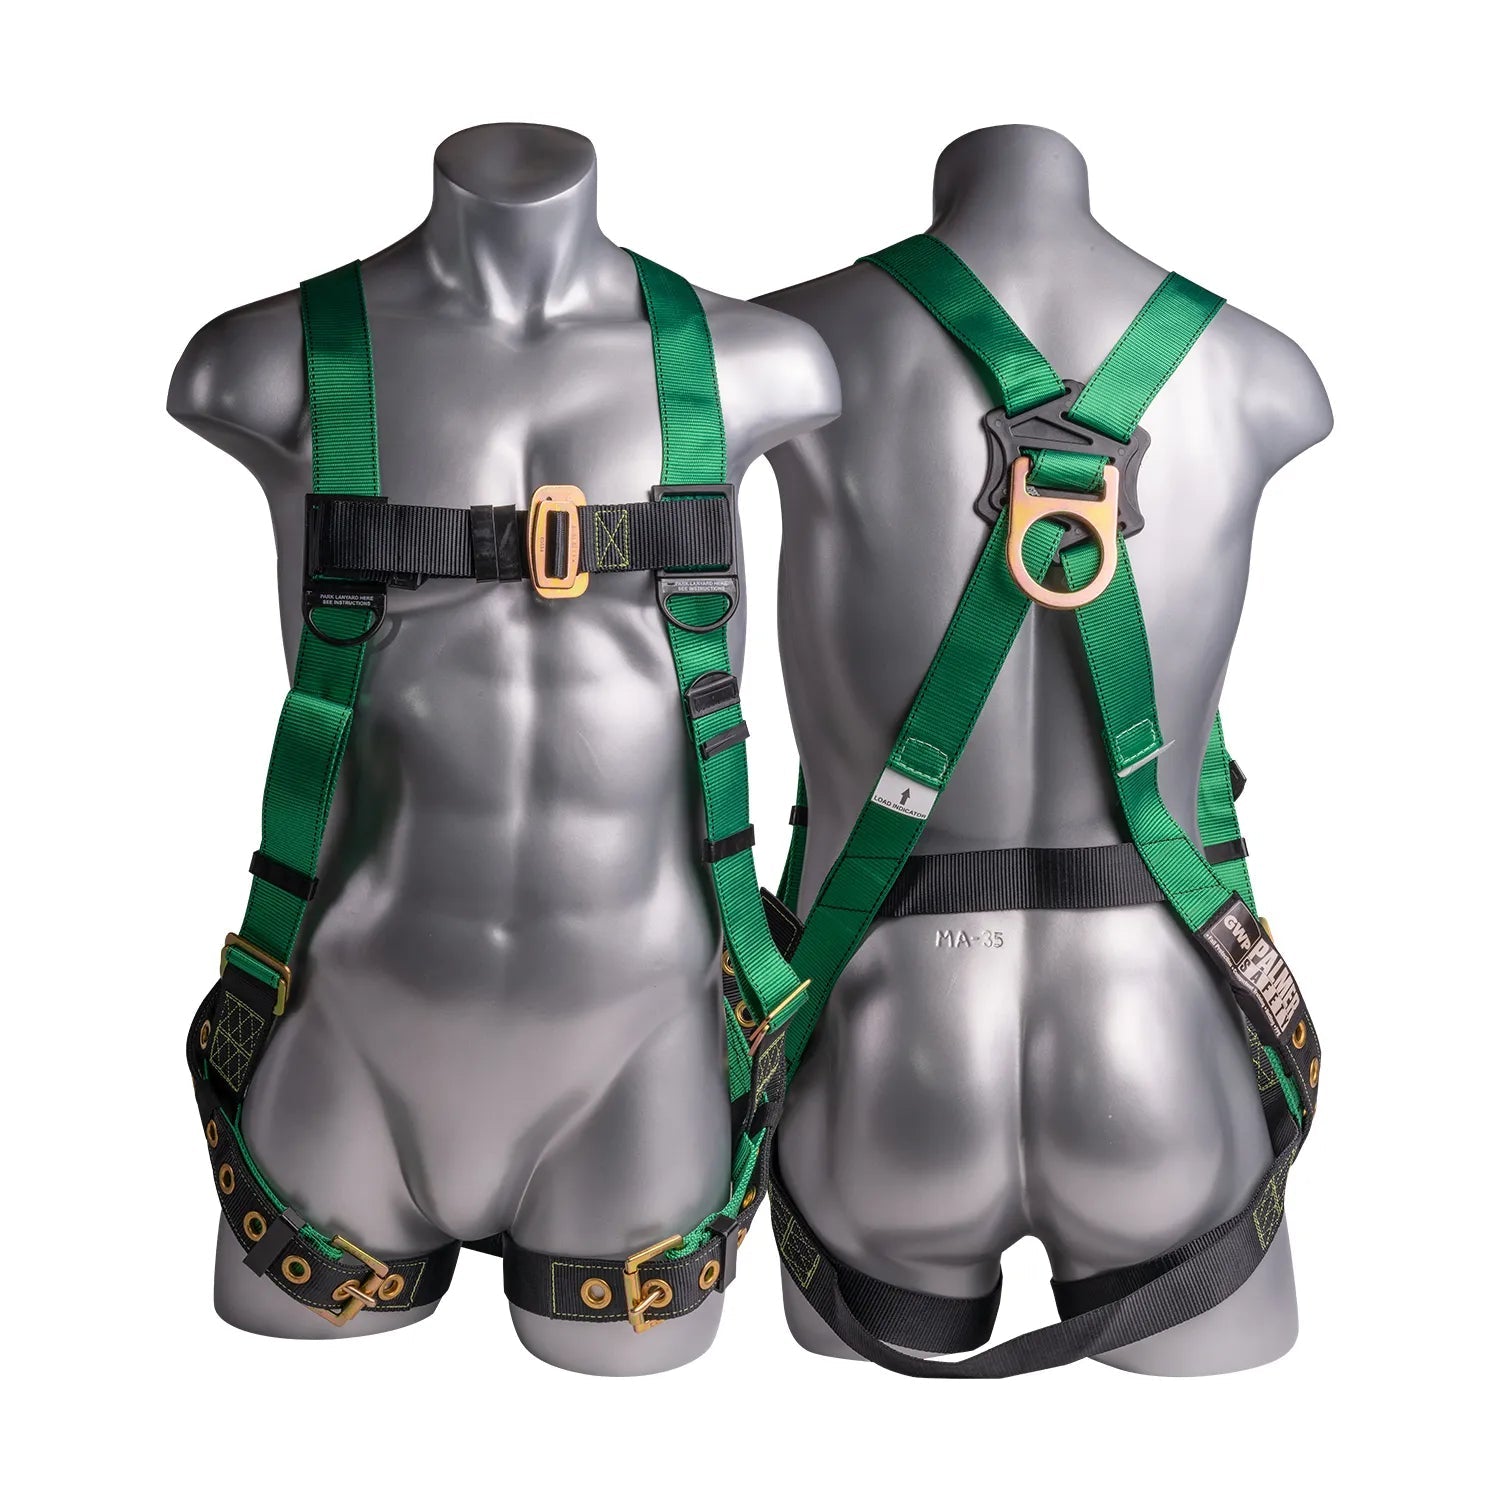 Construction Safety Harness 5 Point, Grommet Legs, Back D-Ring, Green - Defender Safety